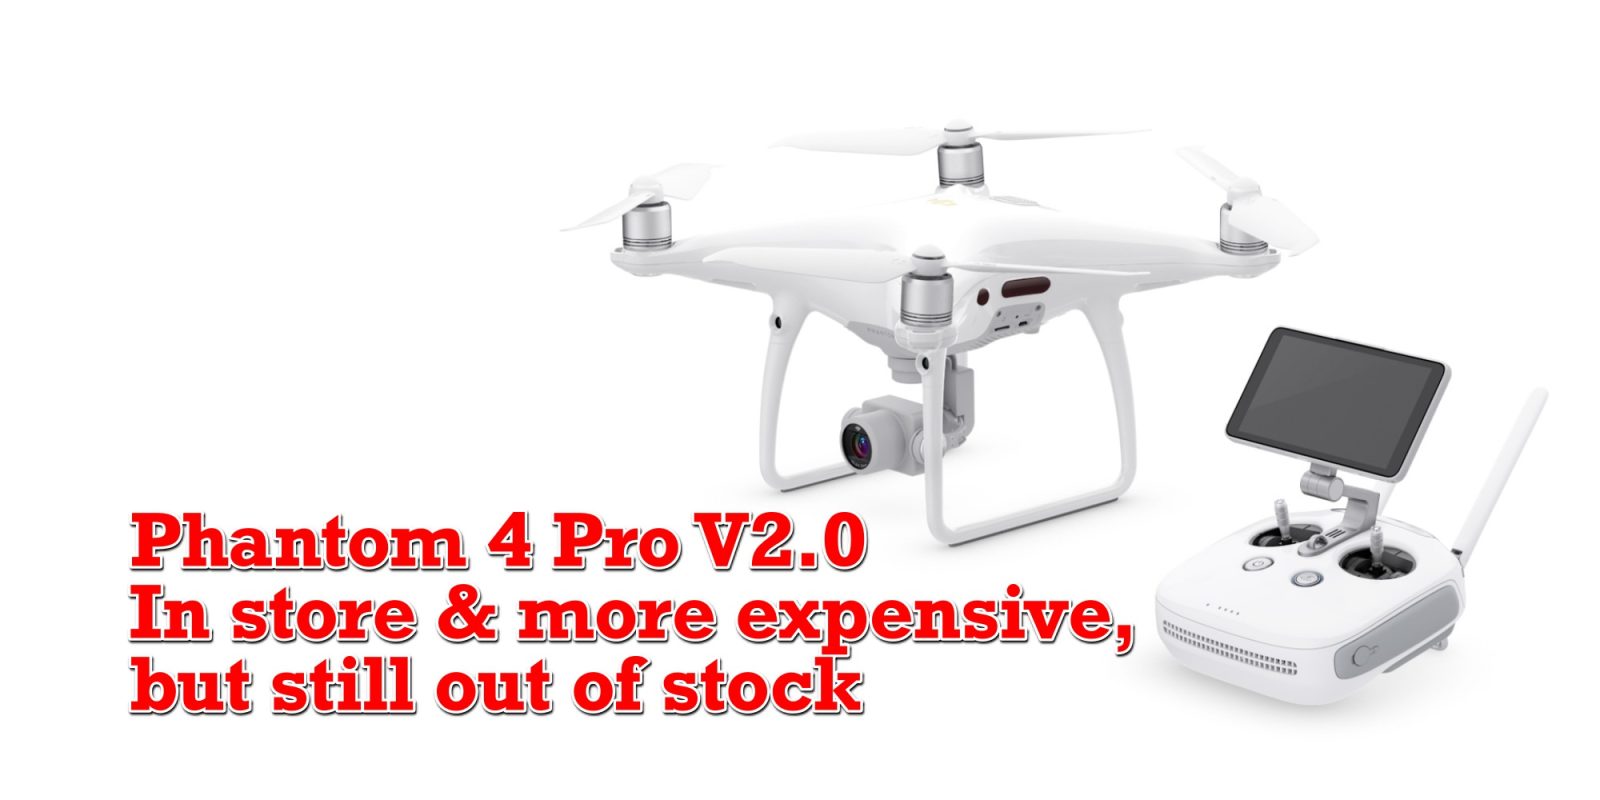 Phantom-4-Pro-V2.0-back-in-DJI-online-store-higher-price-and-out-of-stock.jpg